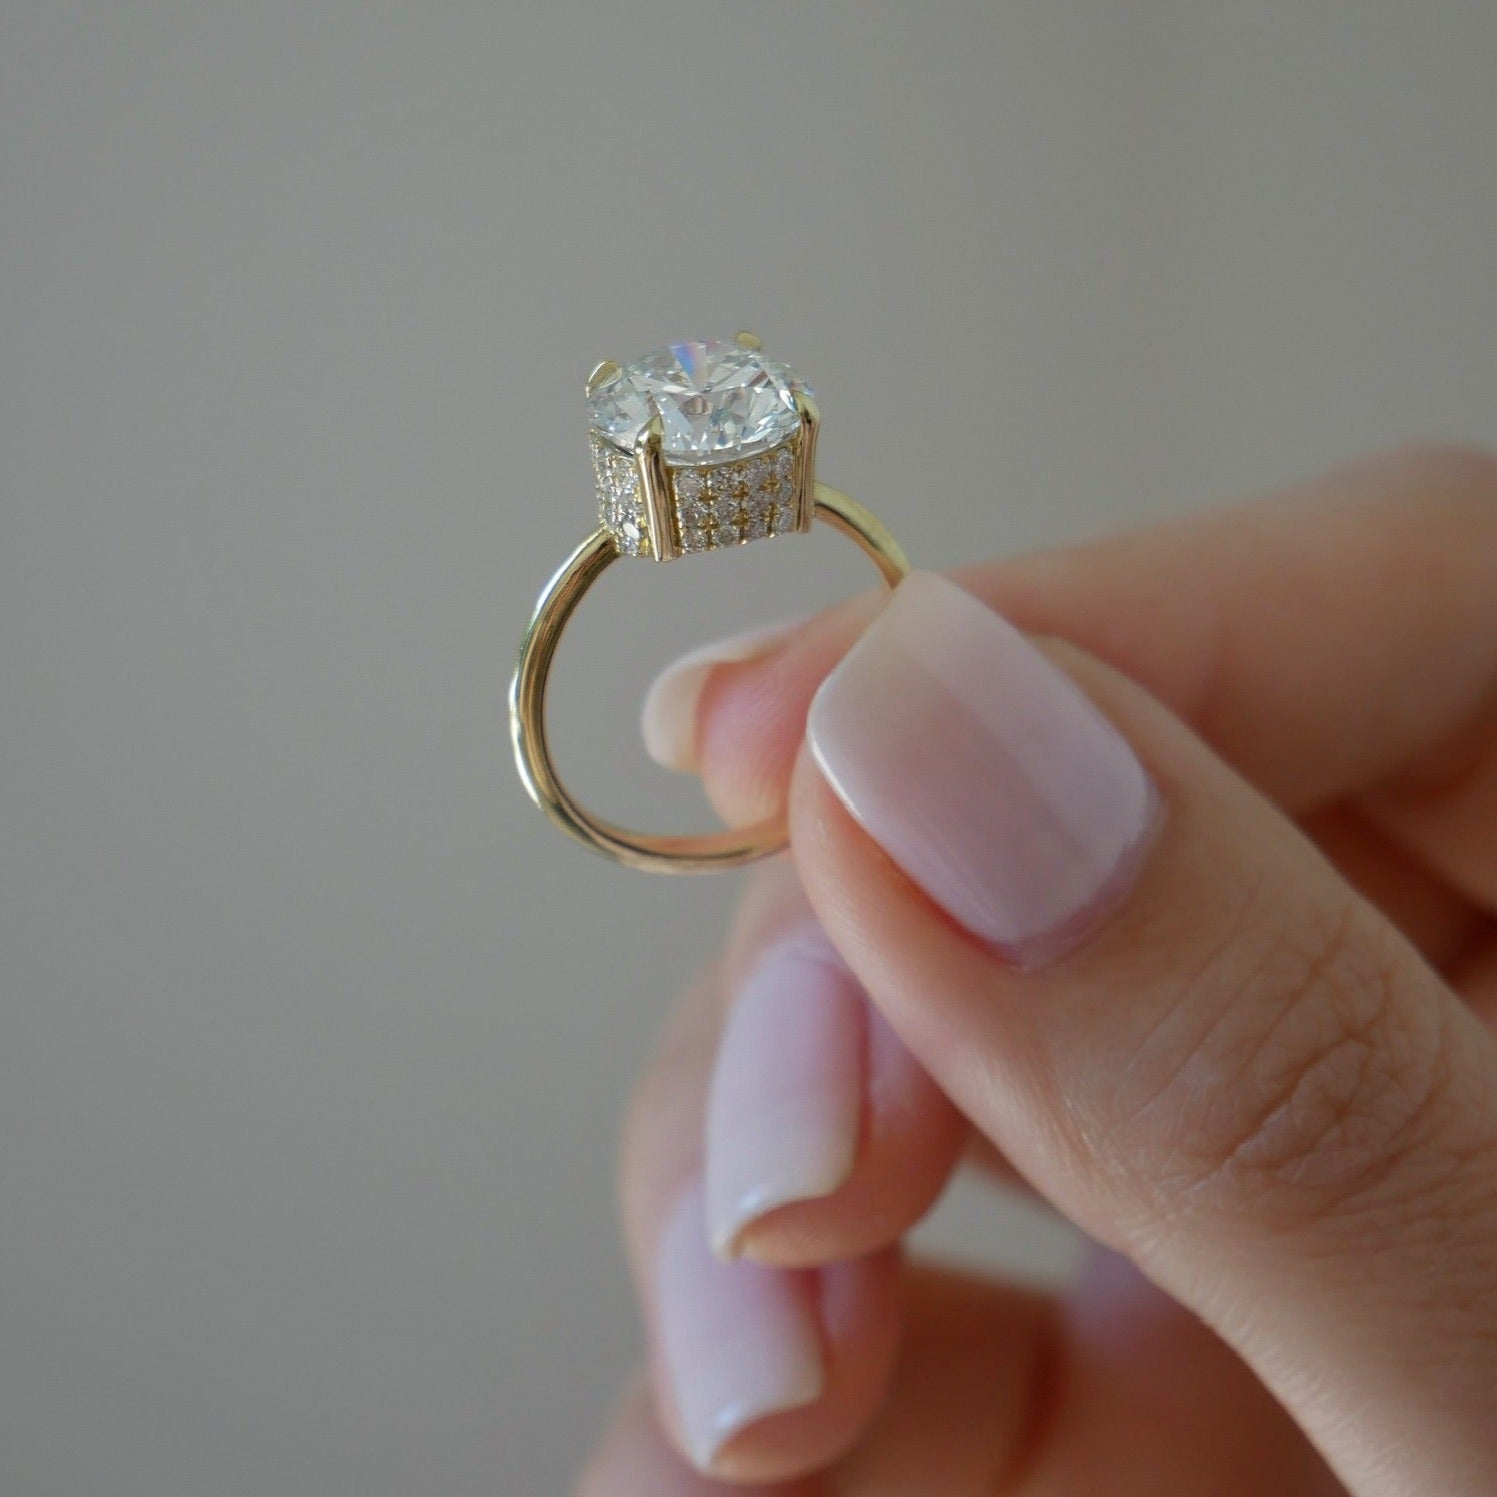 The Lindsay Engagement Ring with round center diamond, basket covered in pave diamonds, and yellow gold band held in between fingers of model